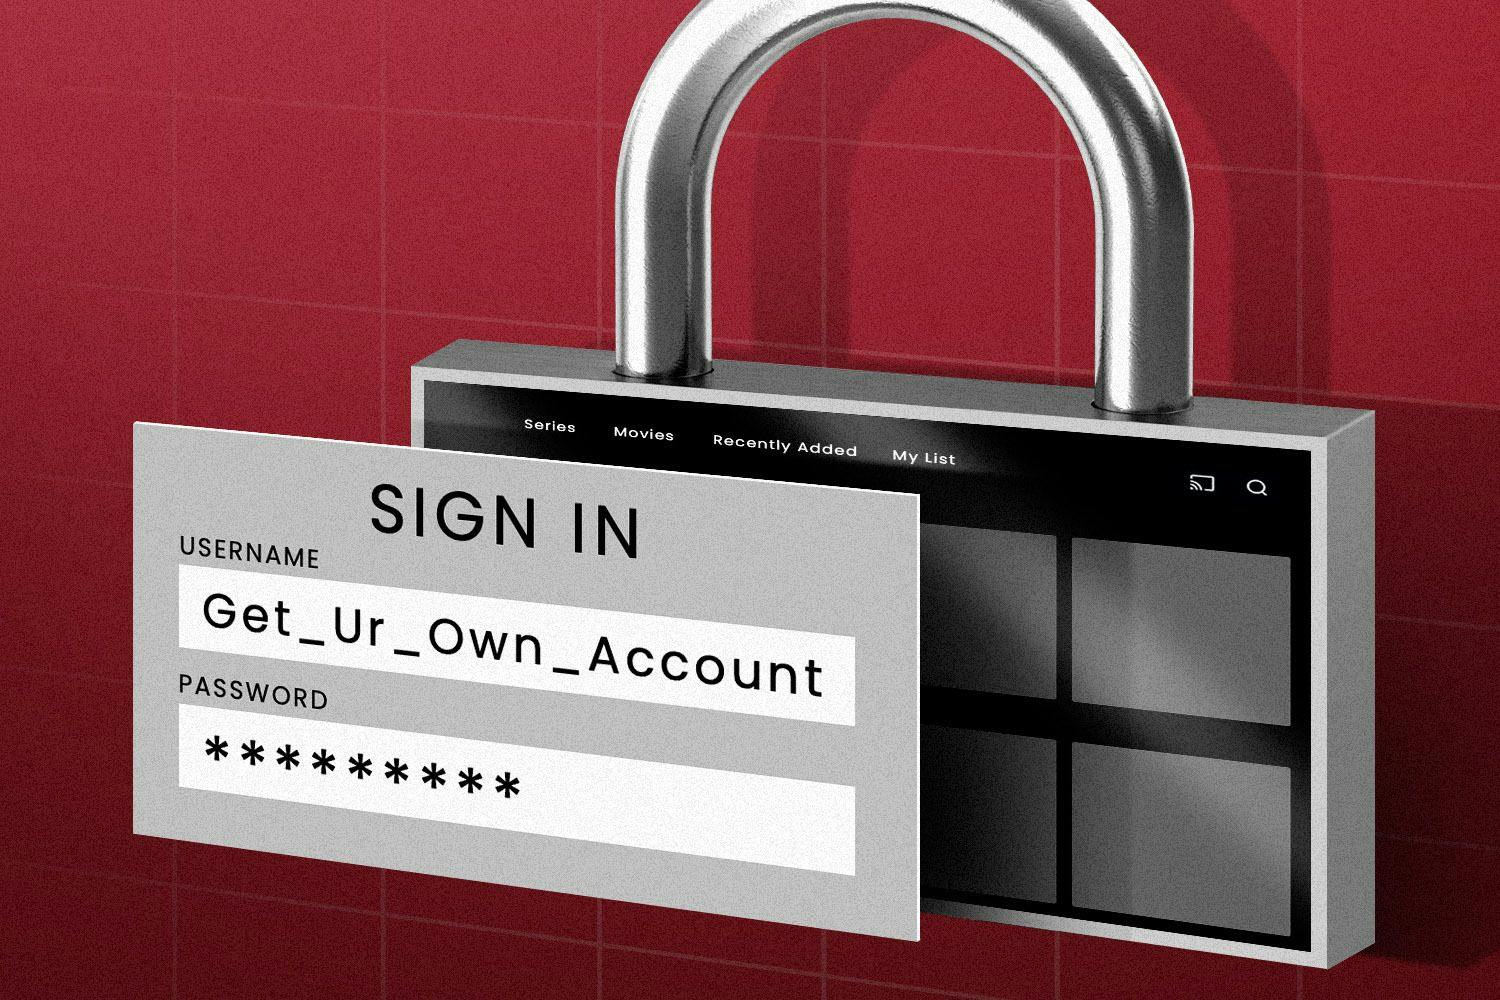 a login screen where the username is "Get_Ur_Own_Account"